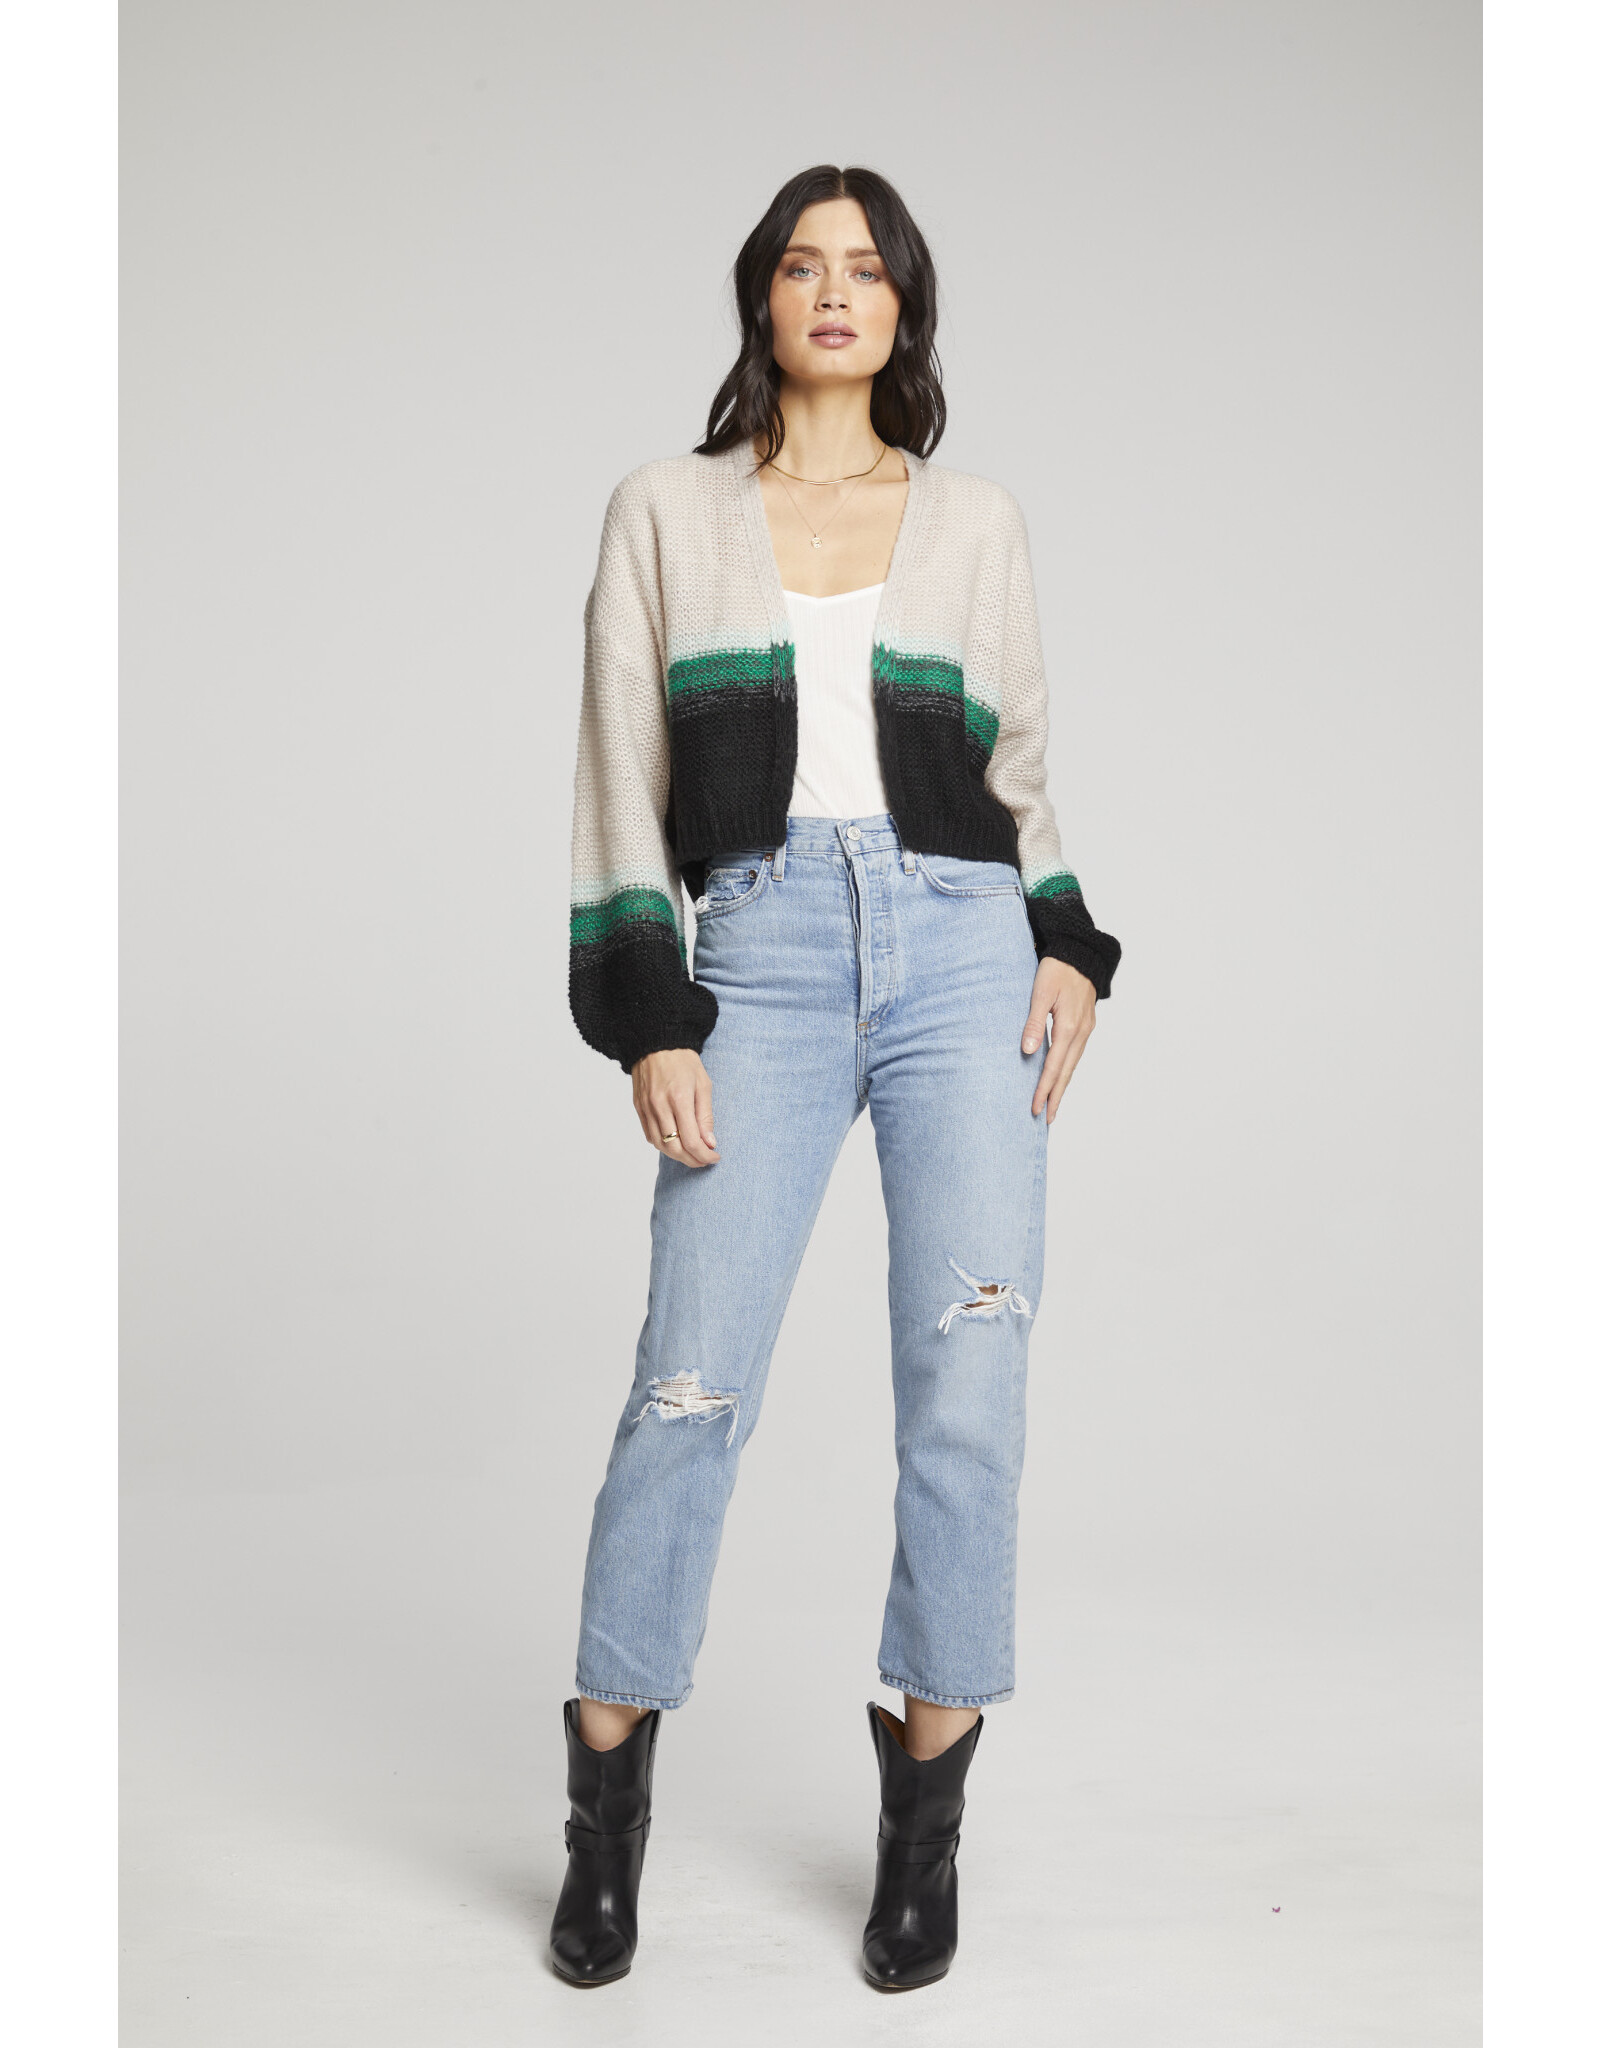 Saltwater luxe SWL Lanette Sweater